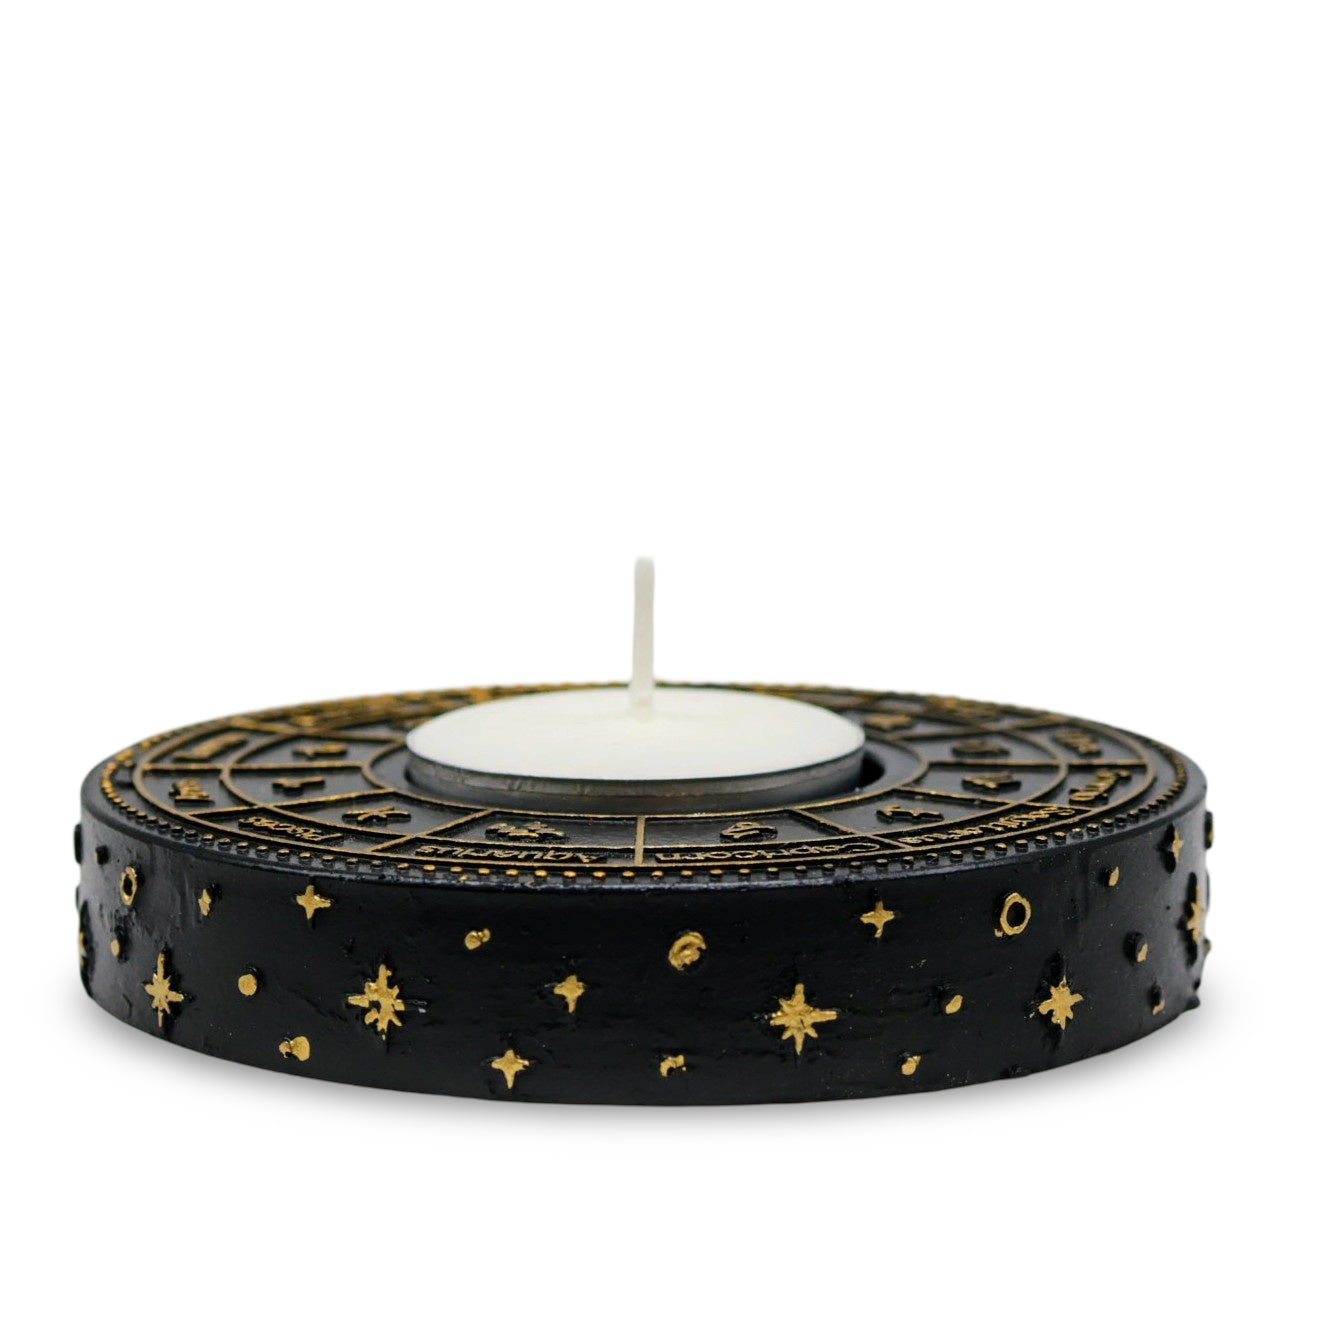 Astrology Wheel Zodiac tealight candle holder with intricate gold-effect design illuminating a celestial-themed space.